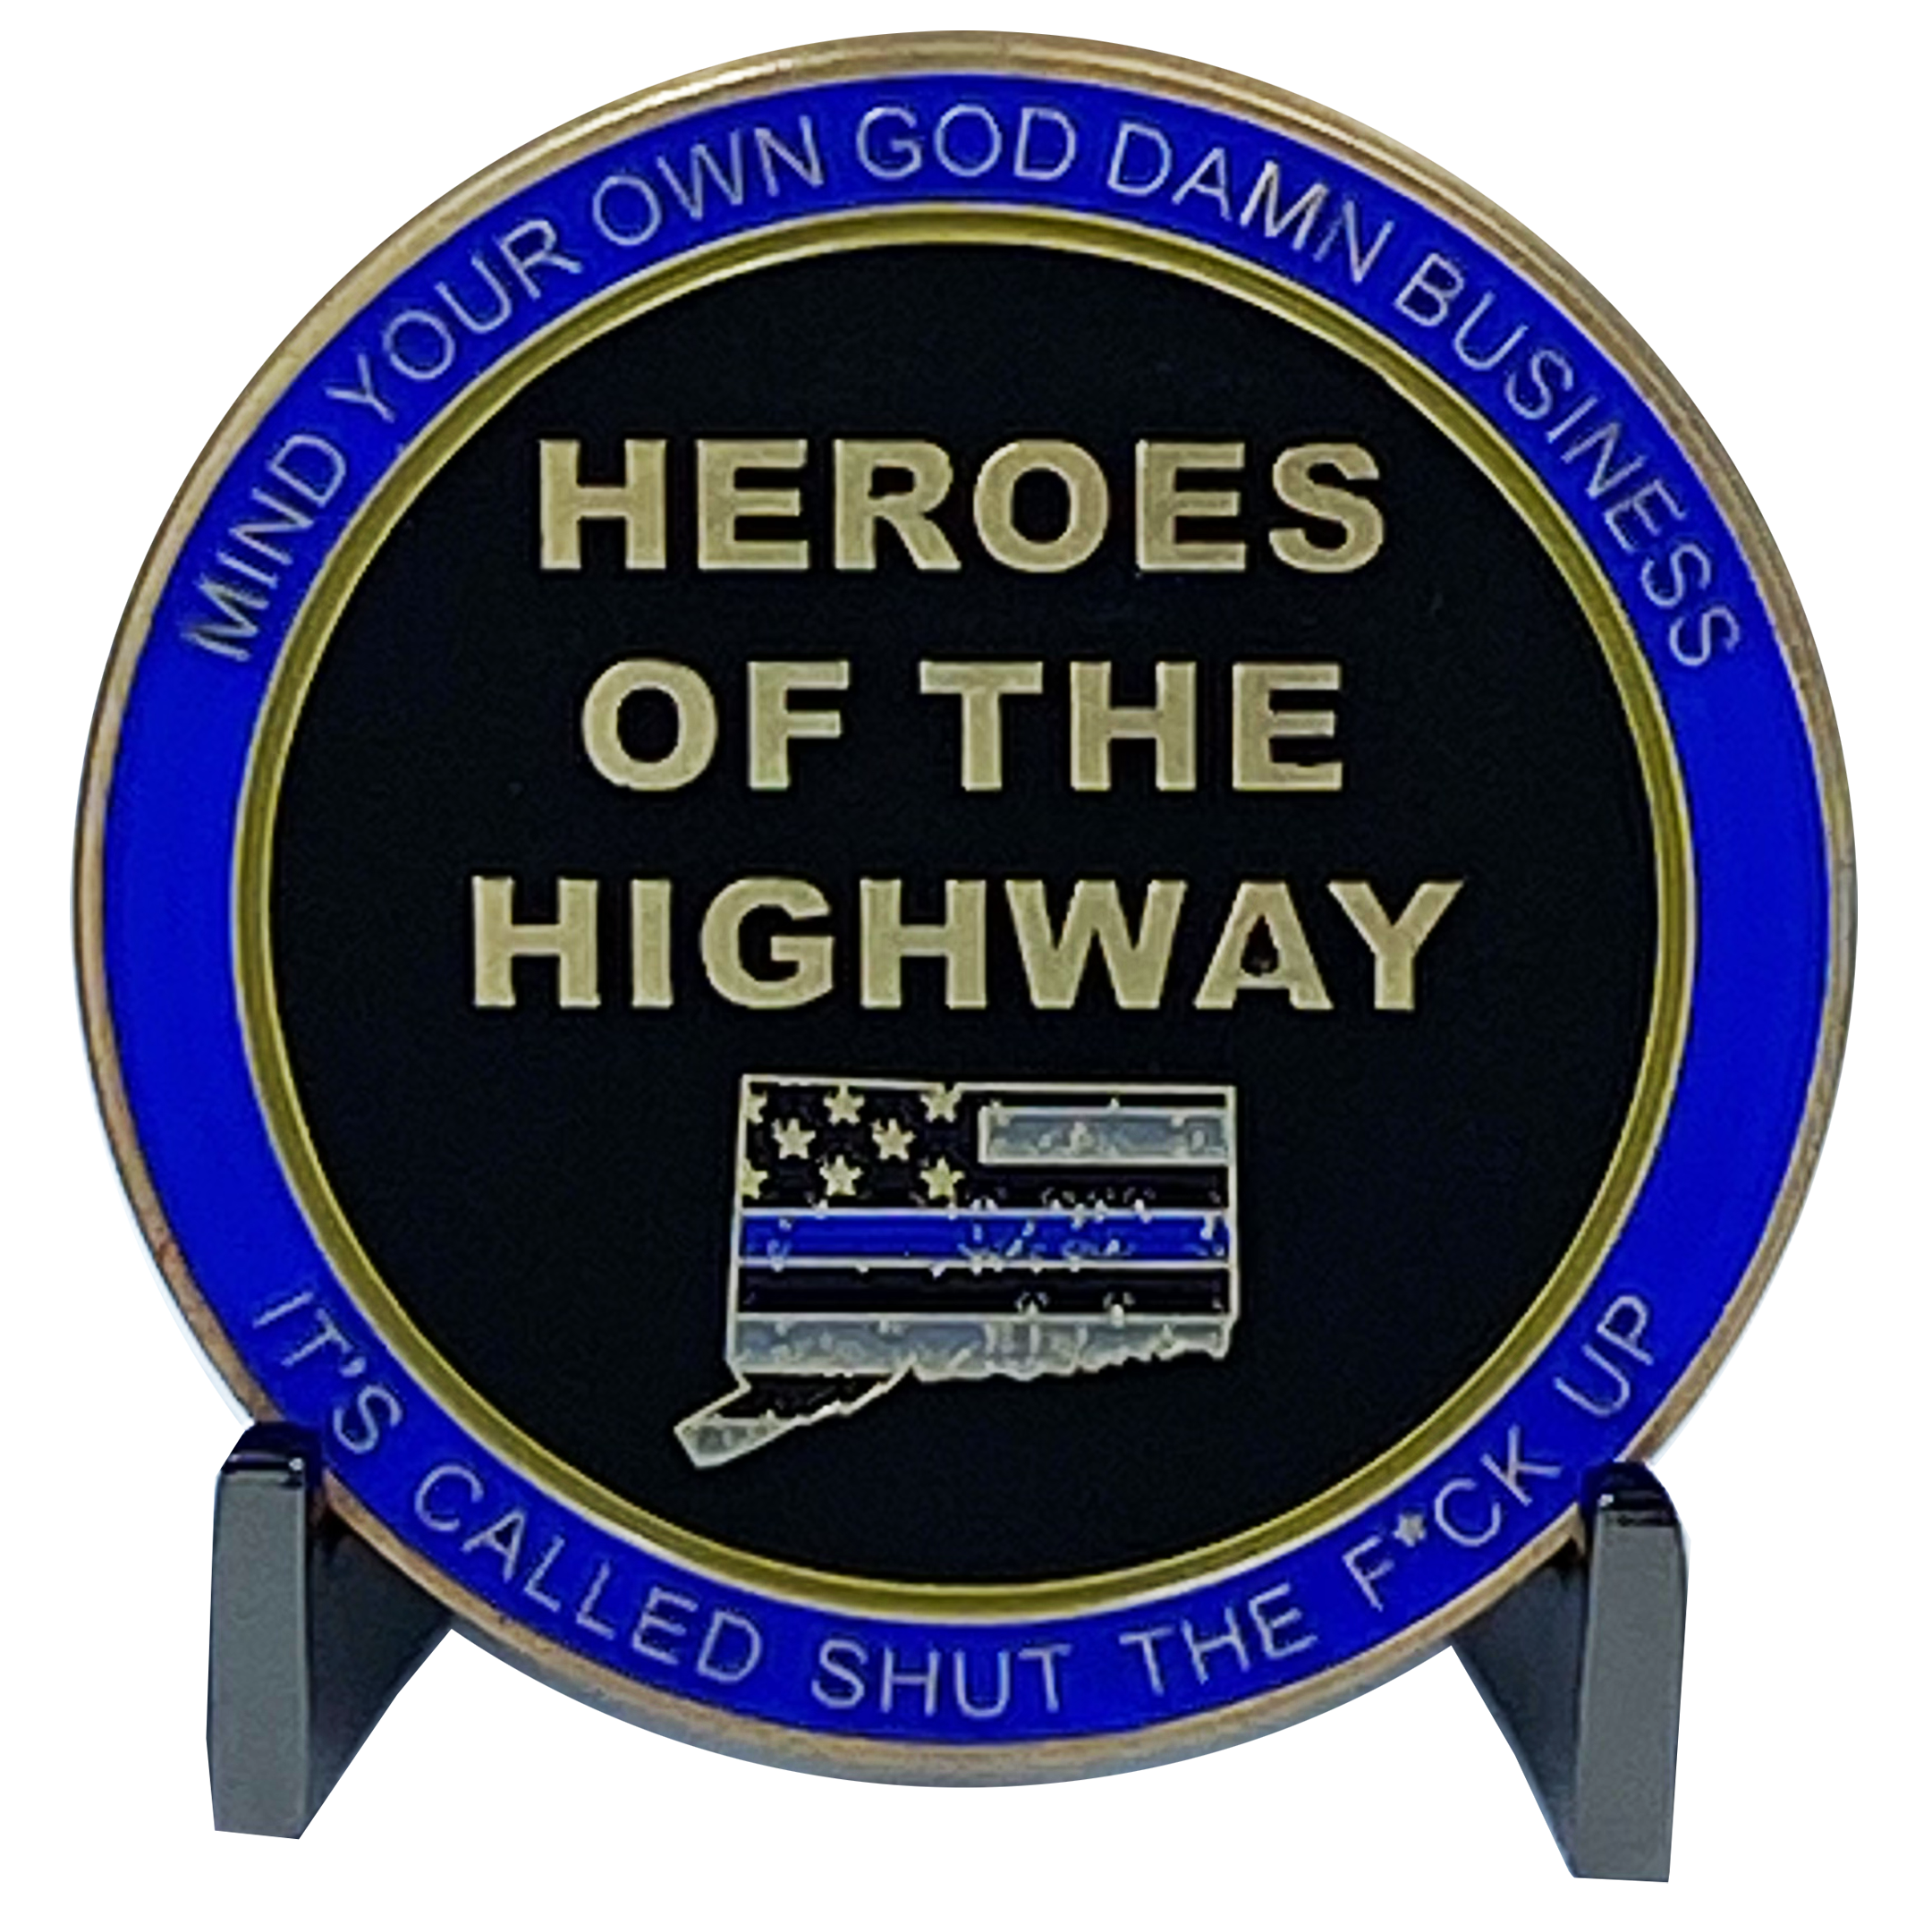 DL6-08 Heroes of the Highway Version 3 Dispensary Container CSP Challenge Coin inspired by Connecticut State Police CT Trooper Matthew Spina